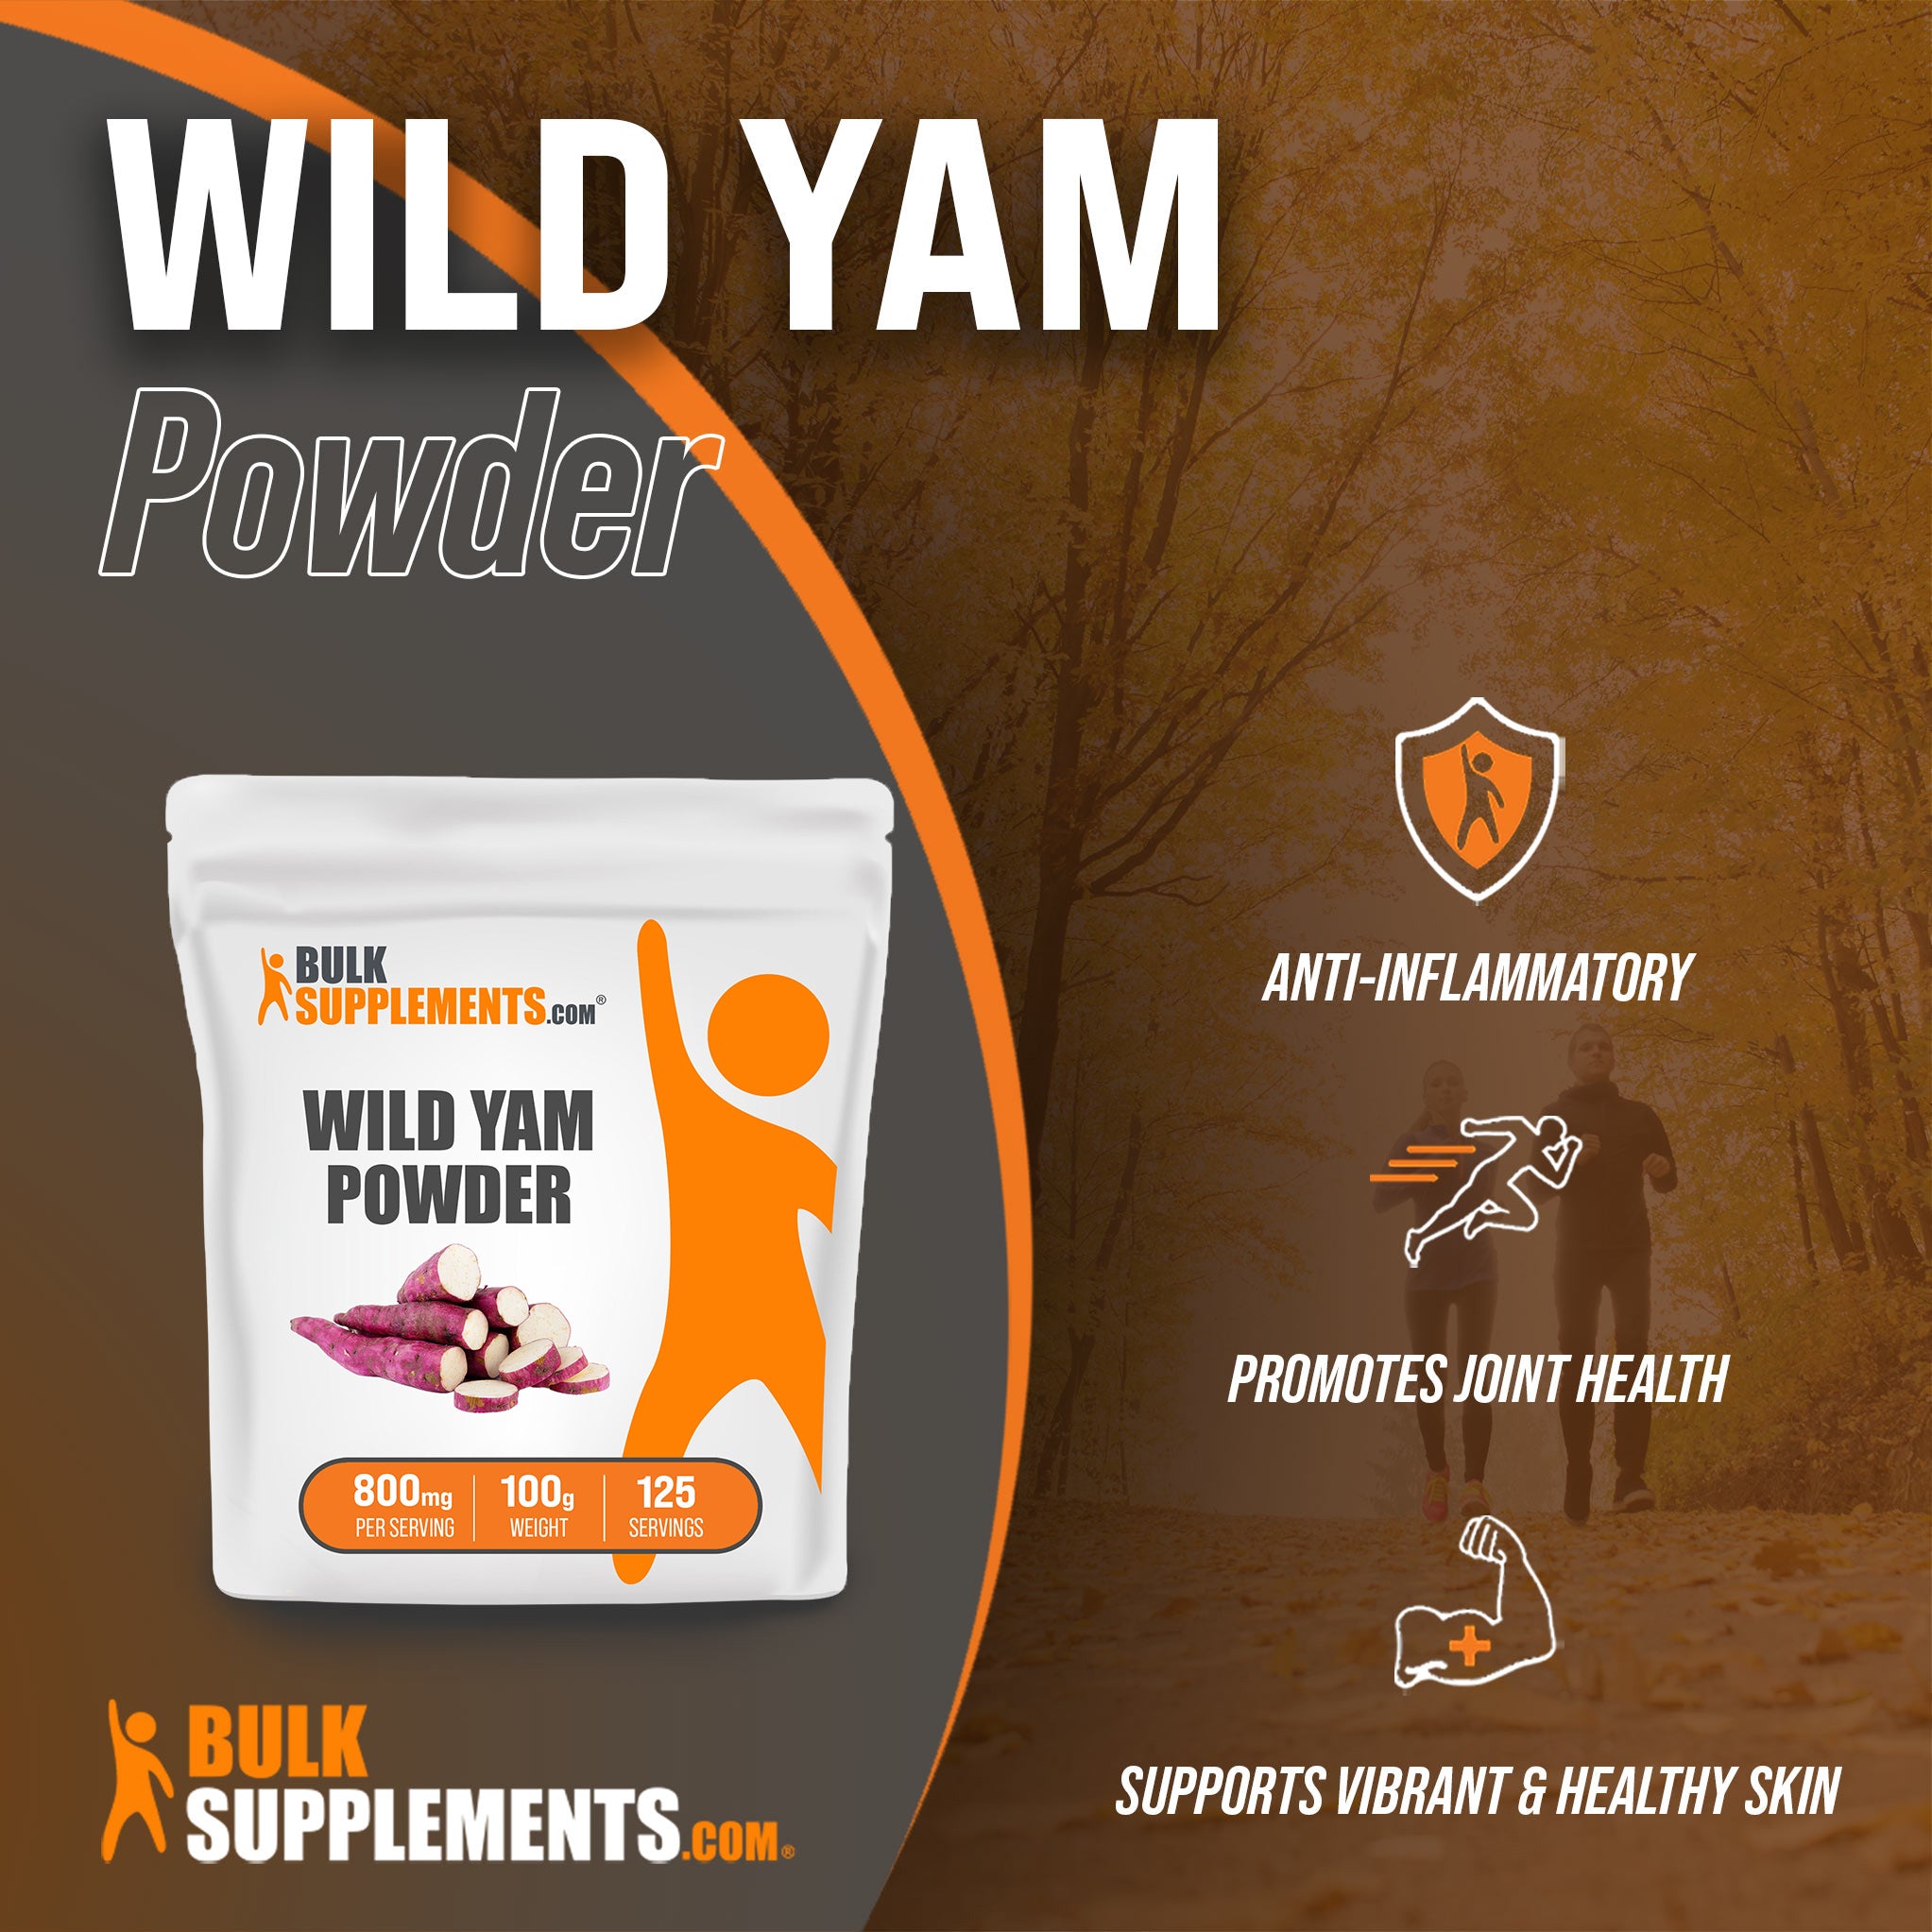 Benefits of Wild Yam Powder: anti-inflammatory, promotes joint health, supports vibrant and healthy skin